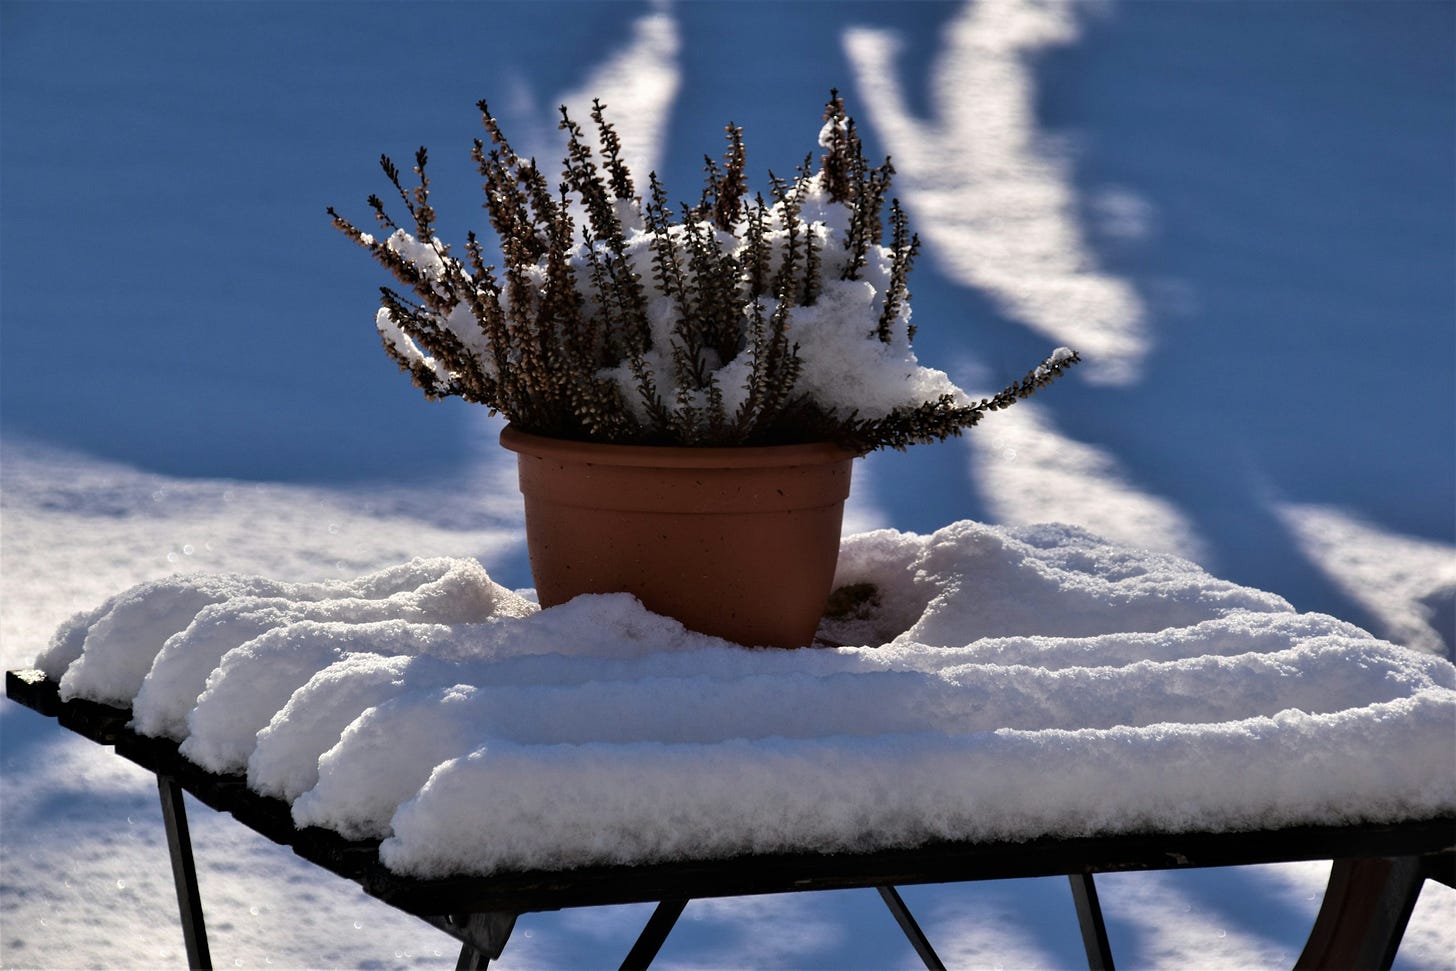 Snow on a table and plant